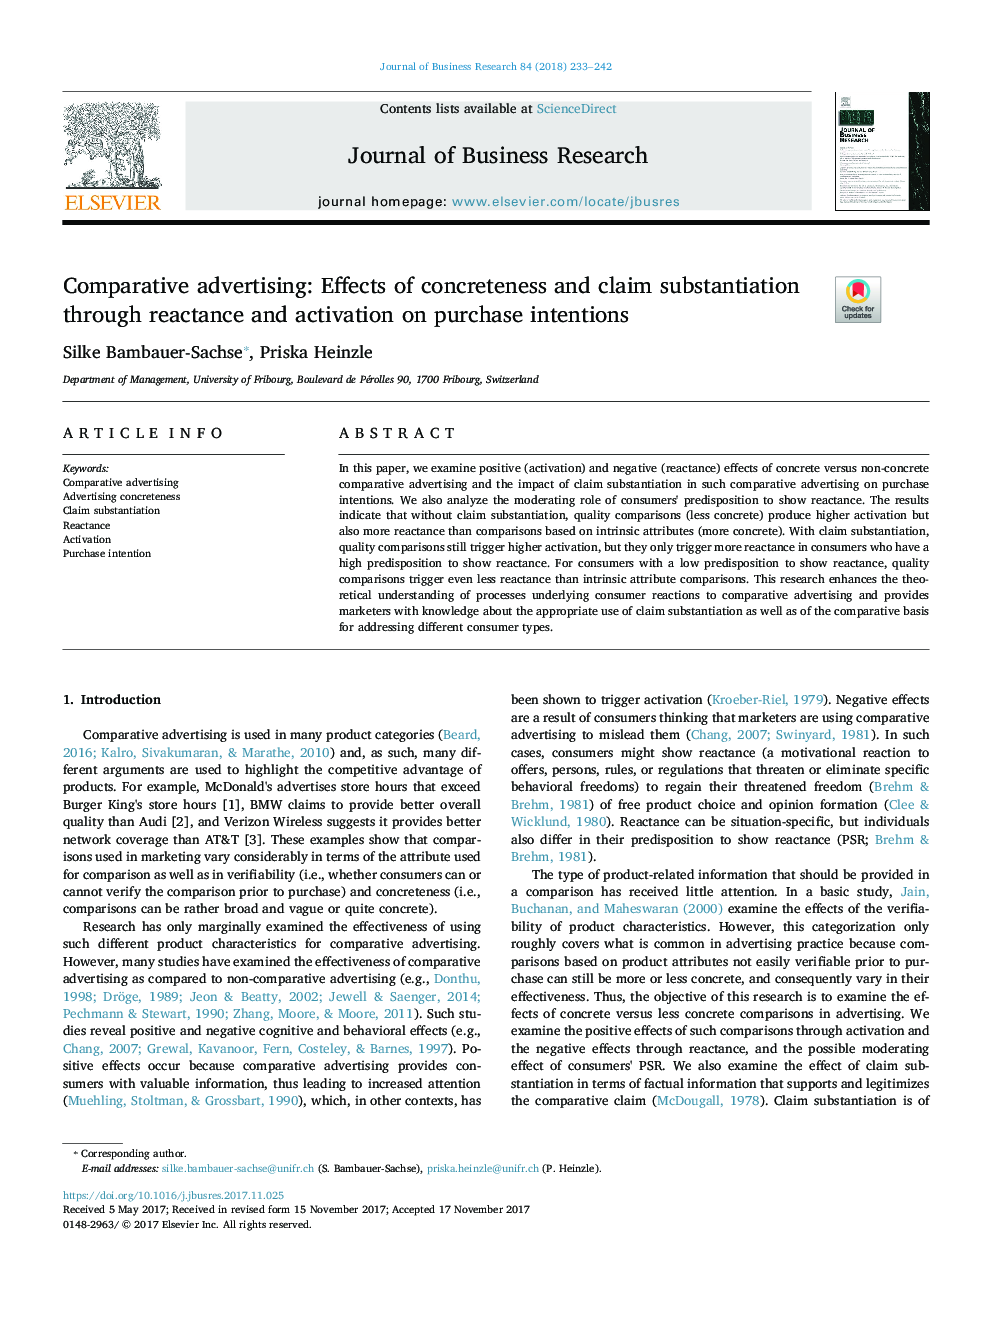 Comparative advertising: Effects of concreteness and claim substantiation through reactance and activation on purchase intentions